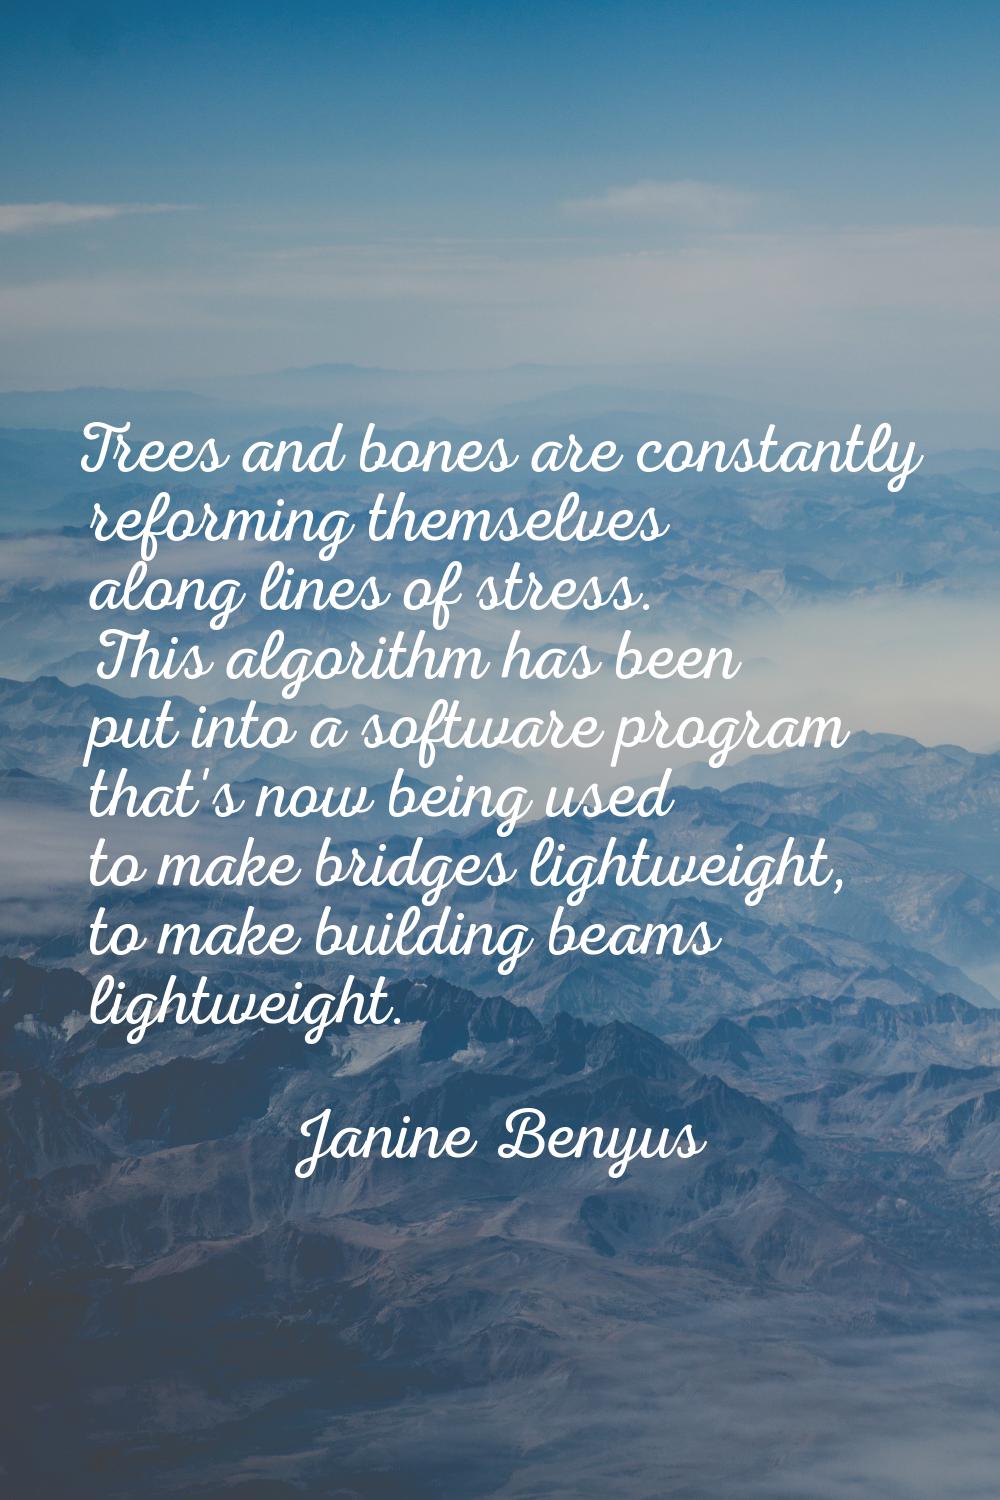 Trees and bones are constantly reforming themselves along lines of stress. This algorithm has been 